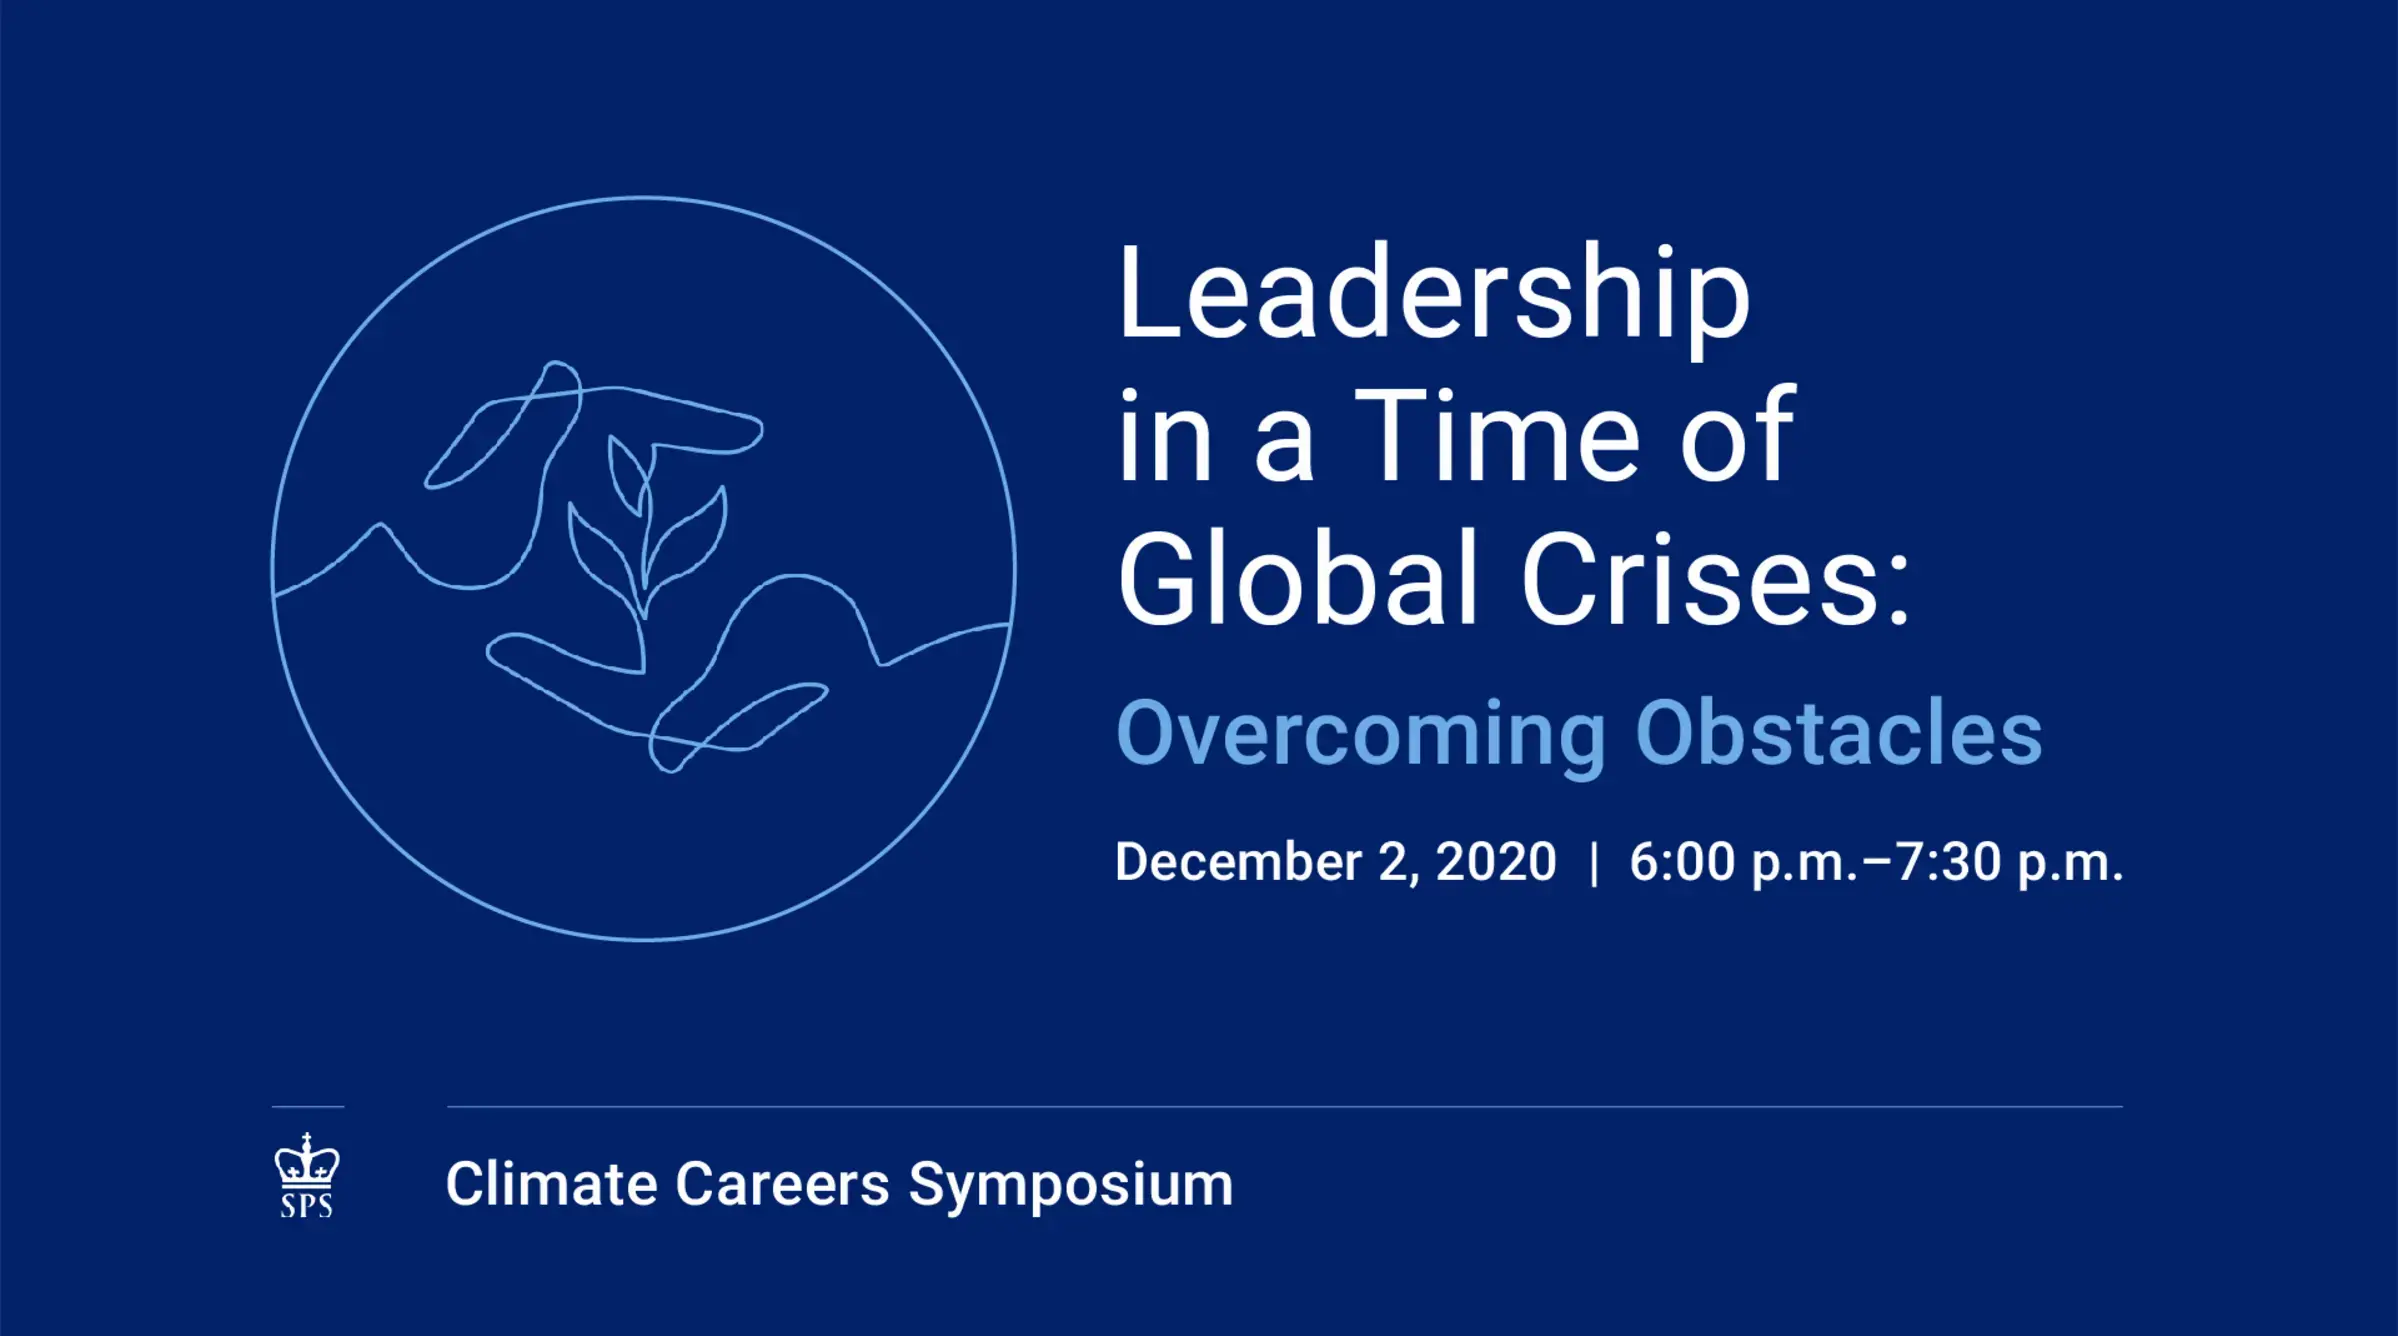 Leadership in a Time of Global Crises: Overcoming Obstacles